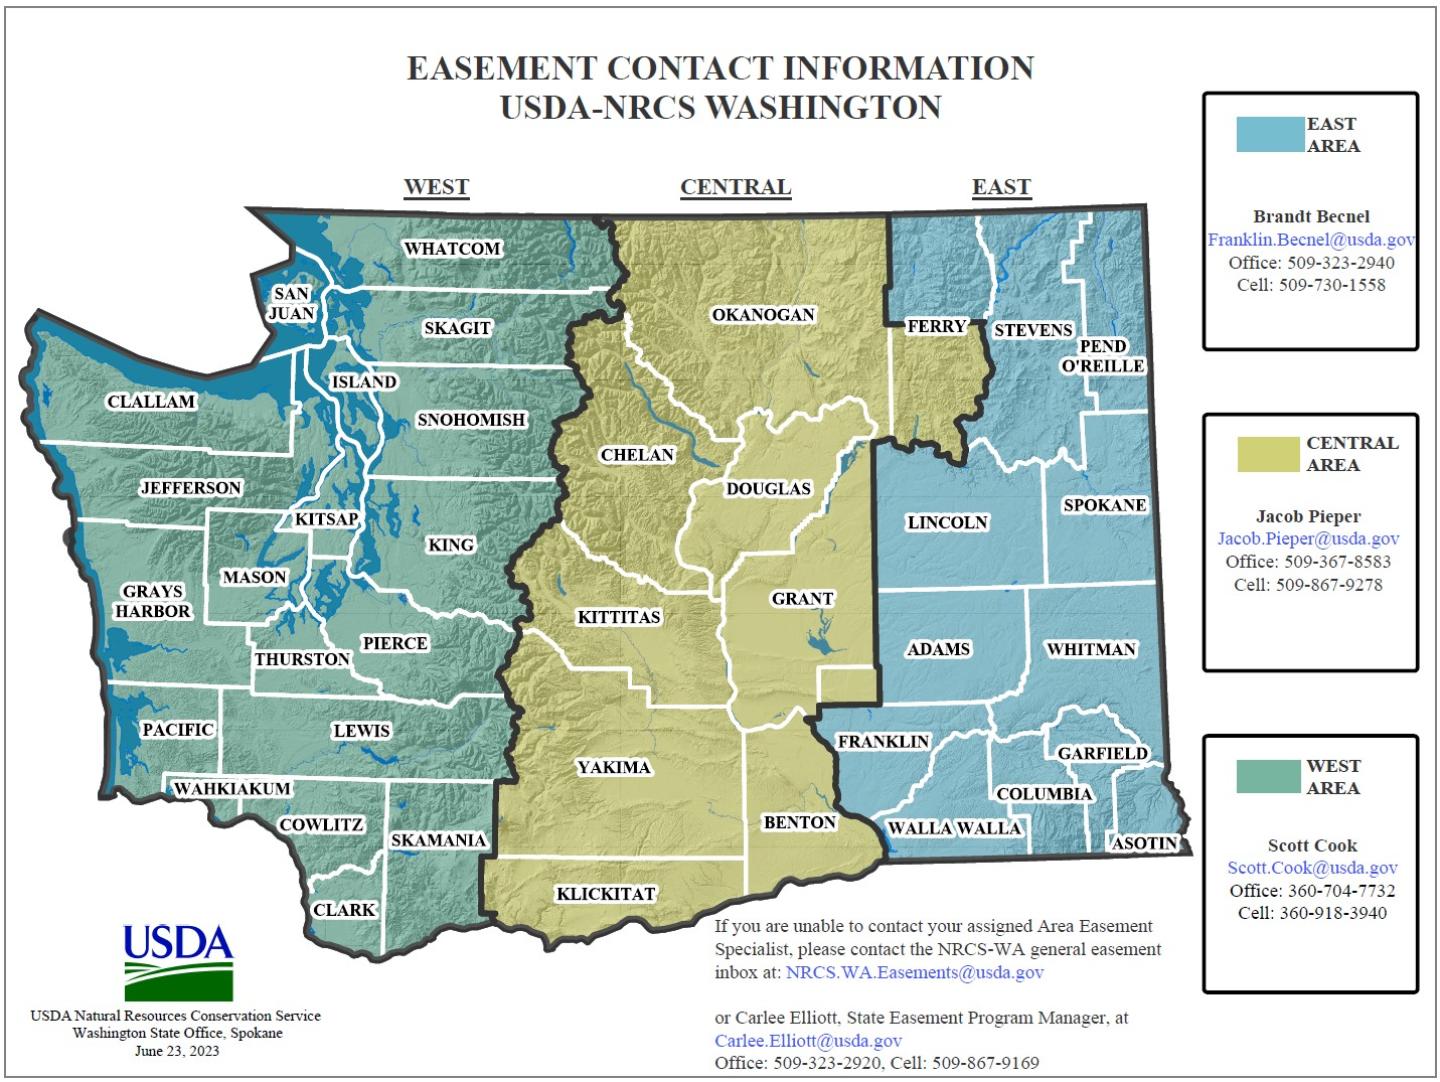 Easement Contact Information for the Natural Resources Conservation Service in Washington